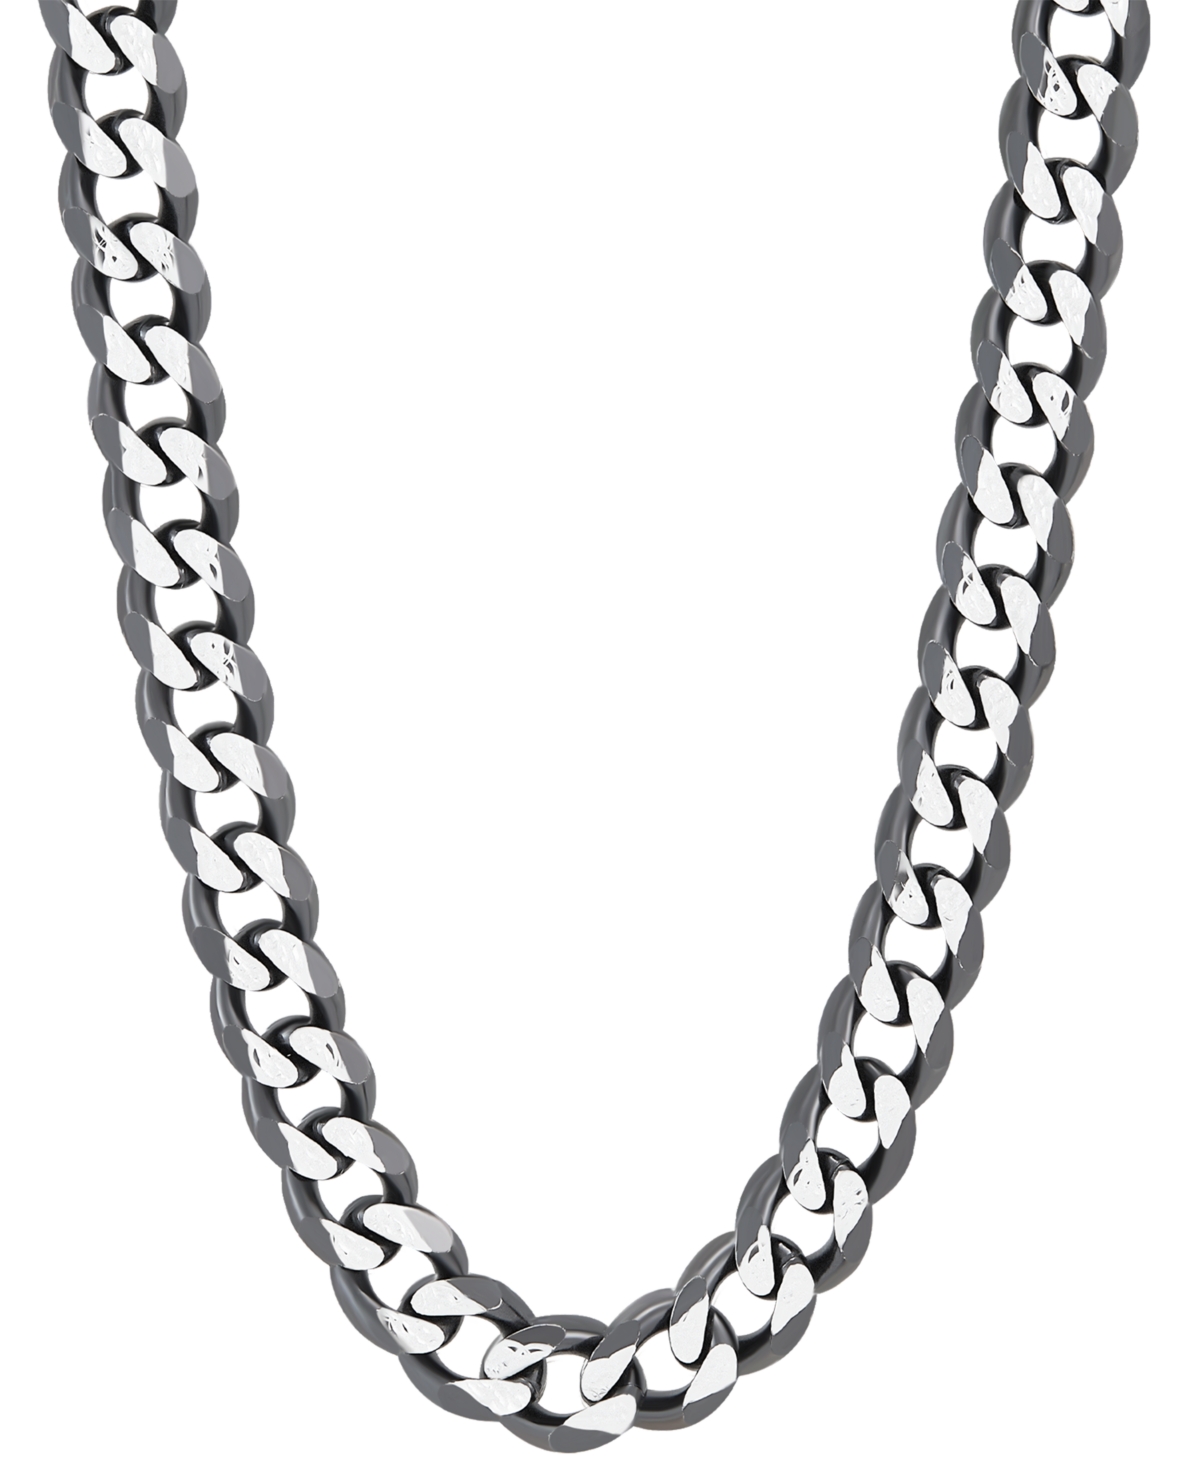 Men's Curb Link 22" Chain Necklace (8mm) in Sterling Silver & Black Ruthenium-Plate - Silver